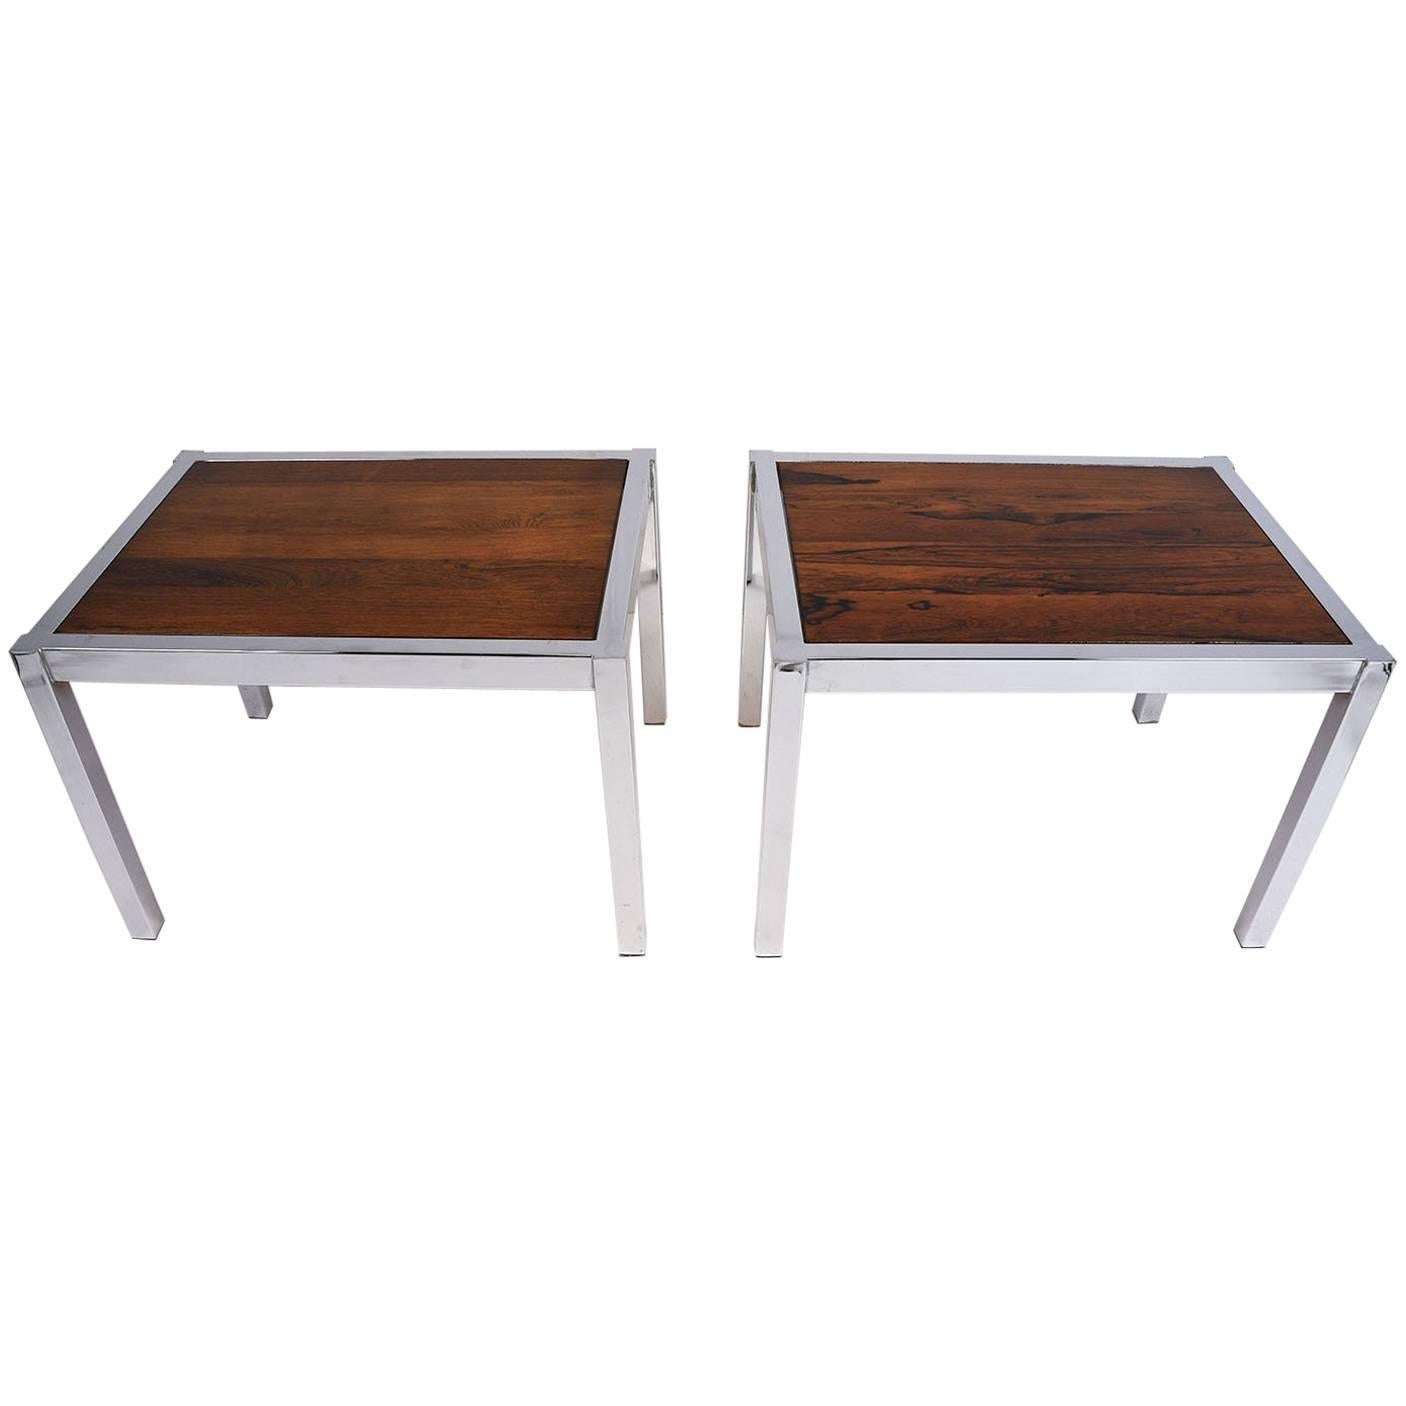 Pair of Mid-Century Modern Chrome and Wood Side Tables